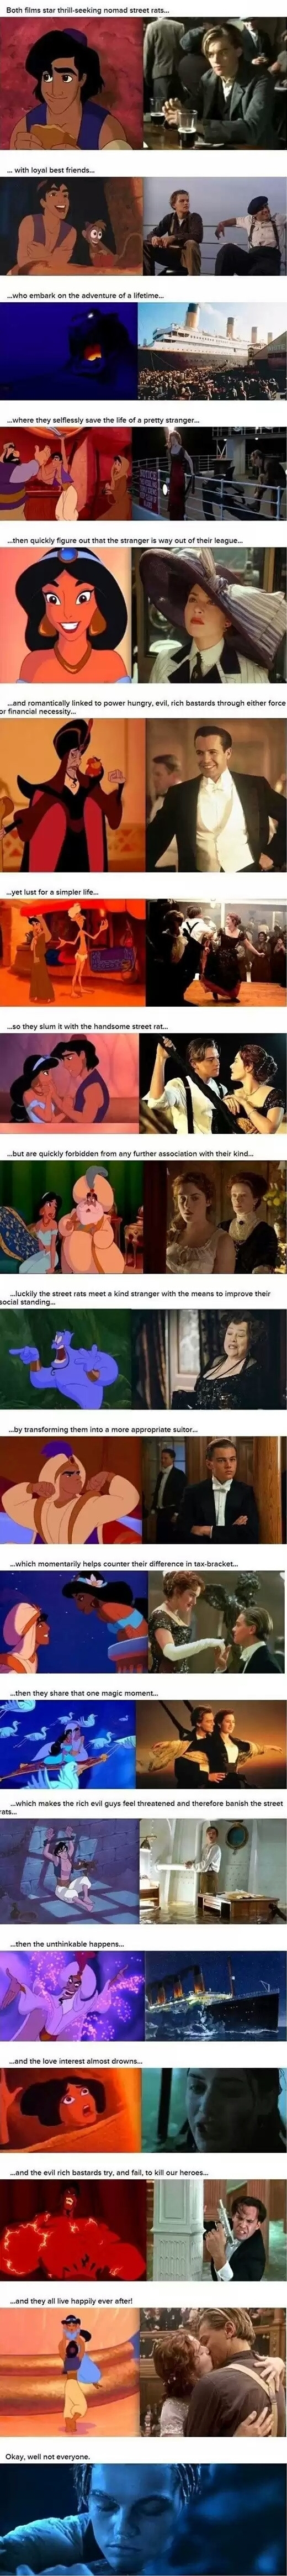 Proof that Aladdin and Titanic are basically the same movie